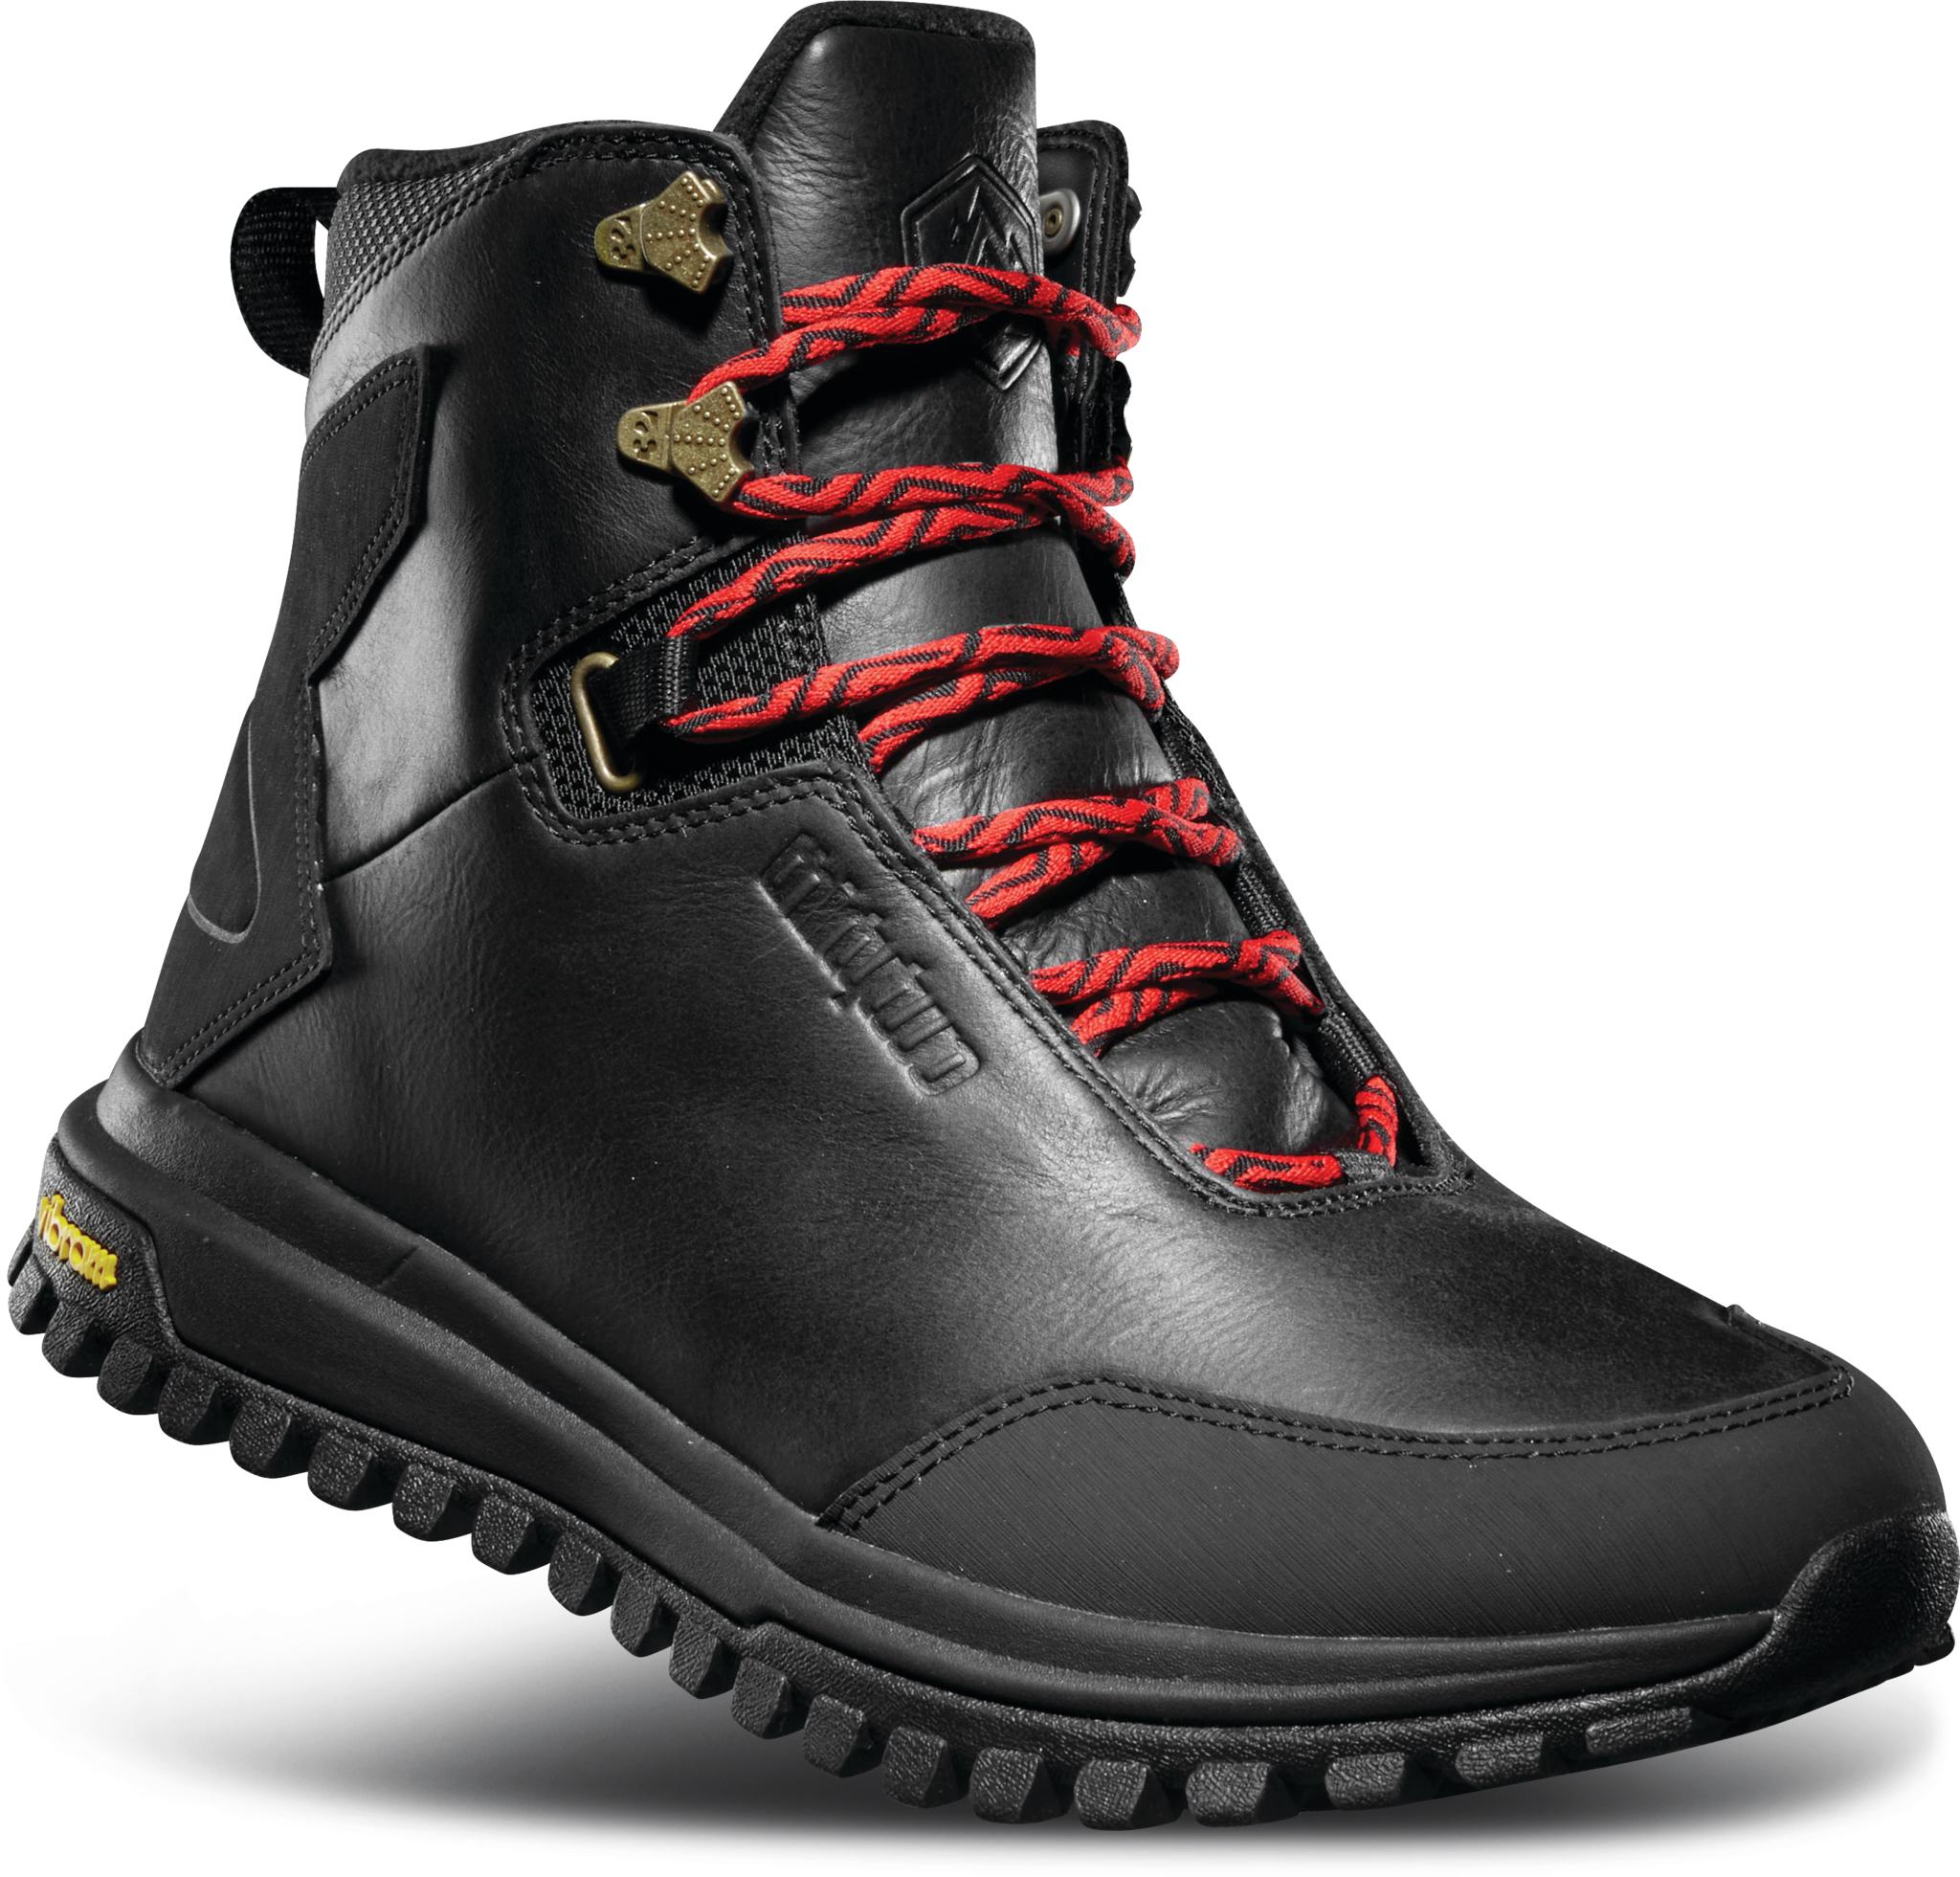 DIGGER BOOT BLACK THIRTY TWO